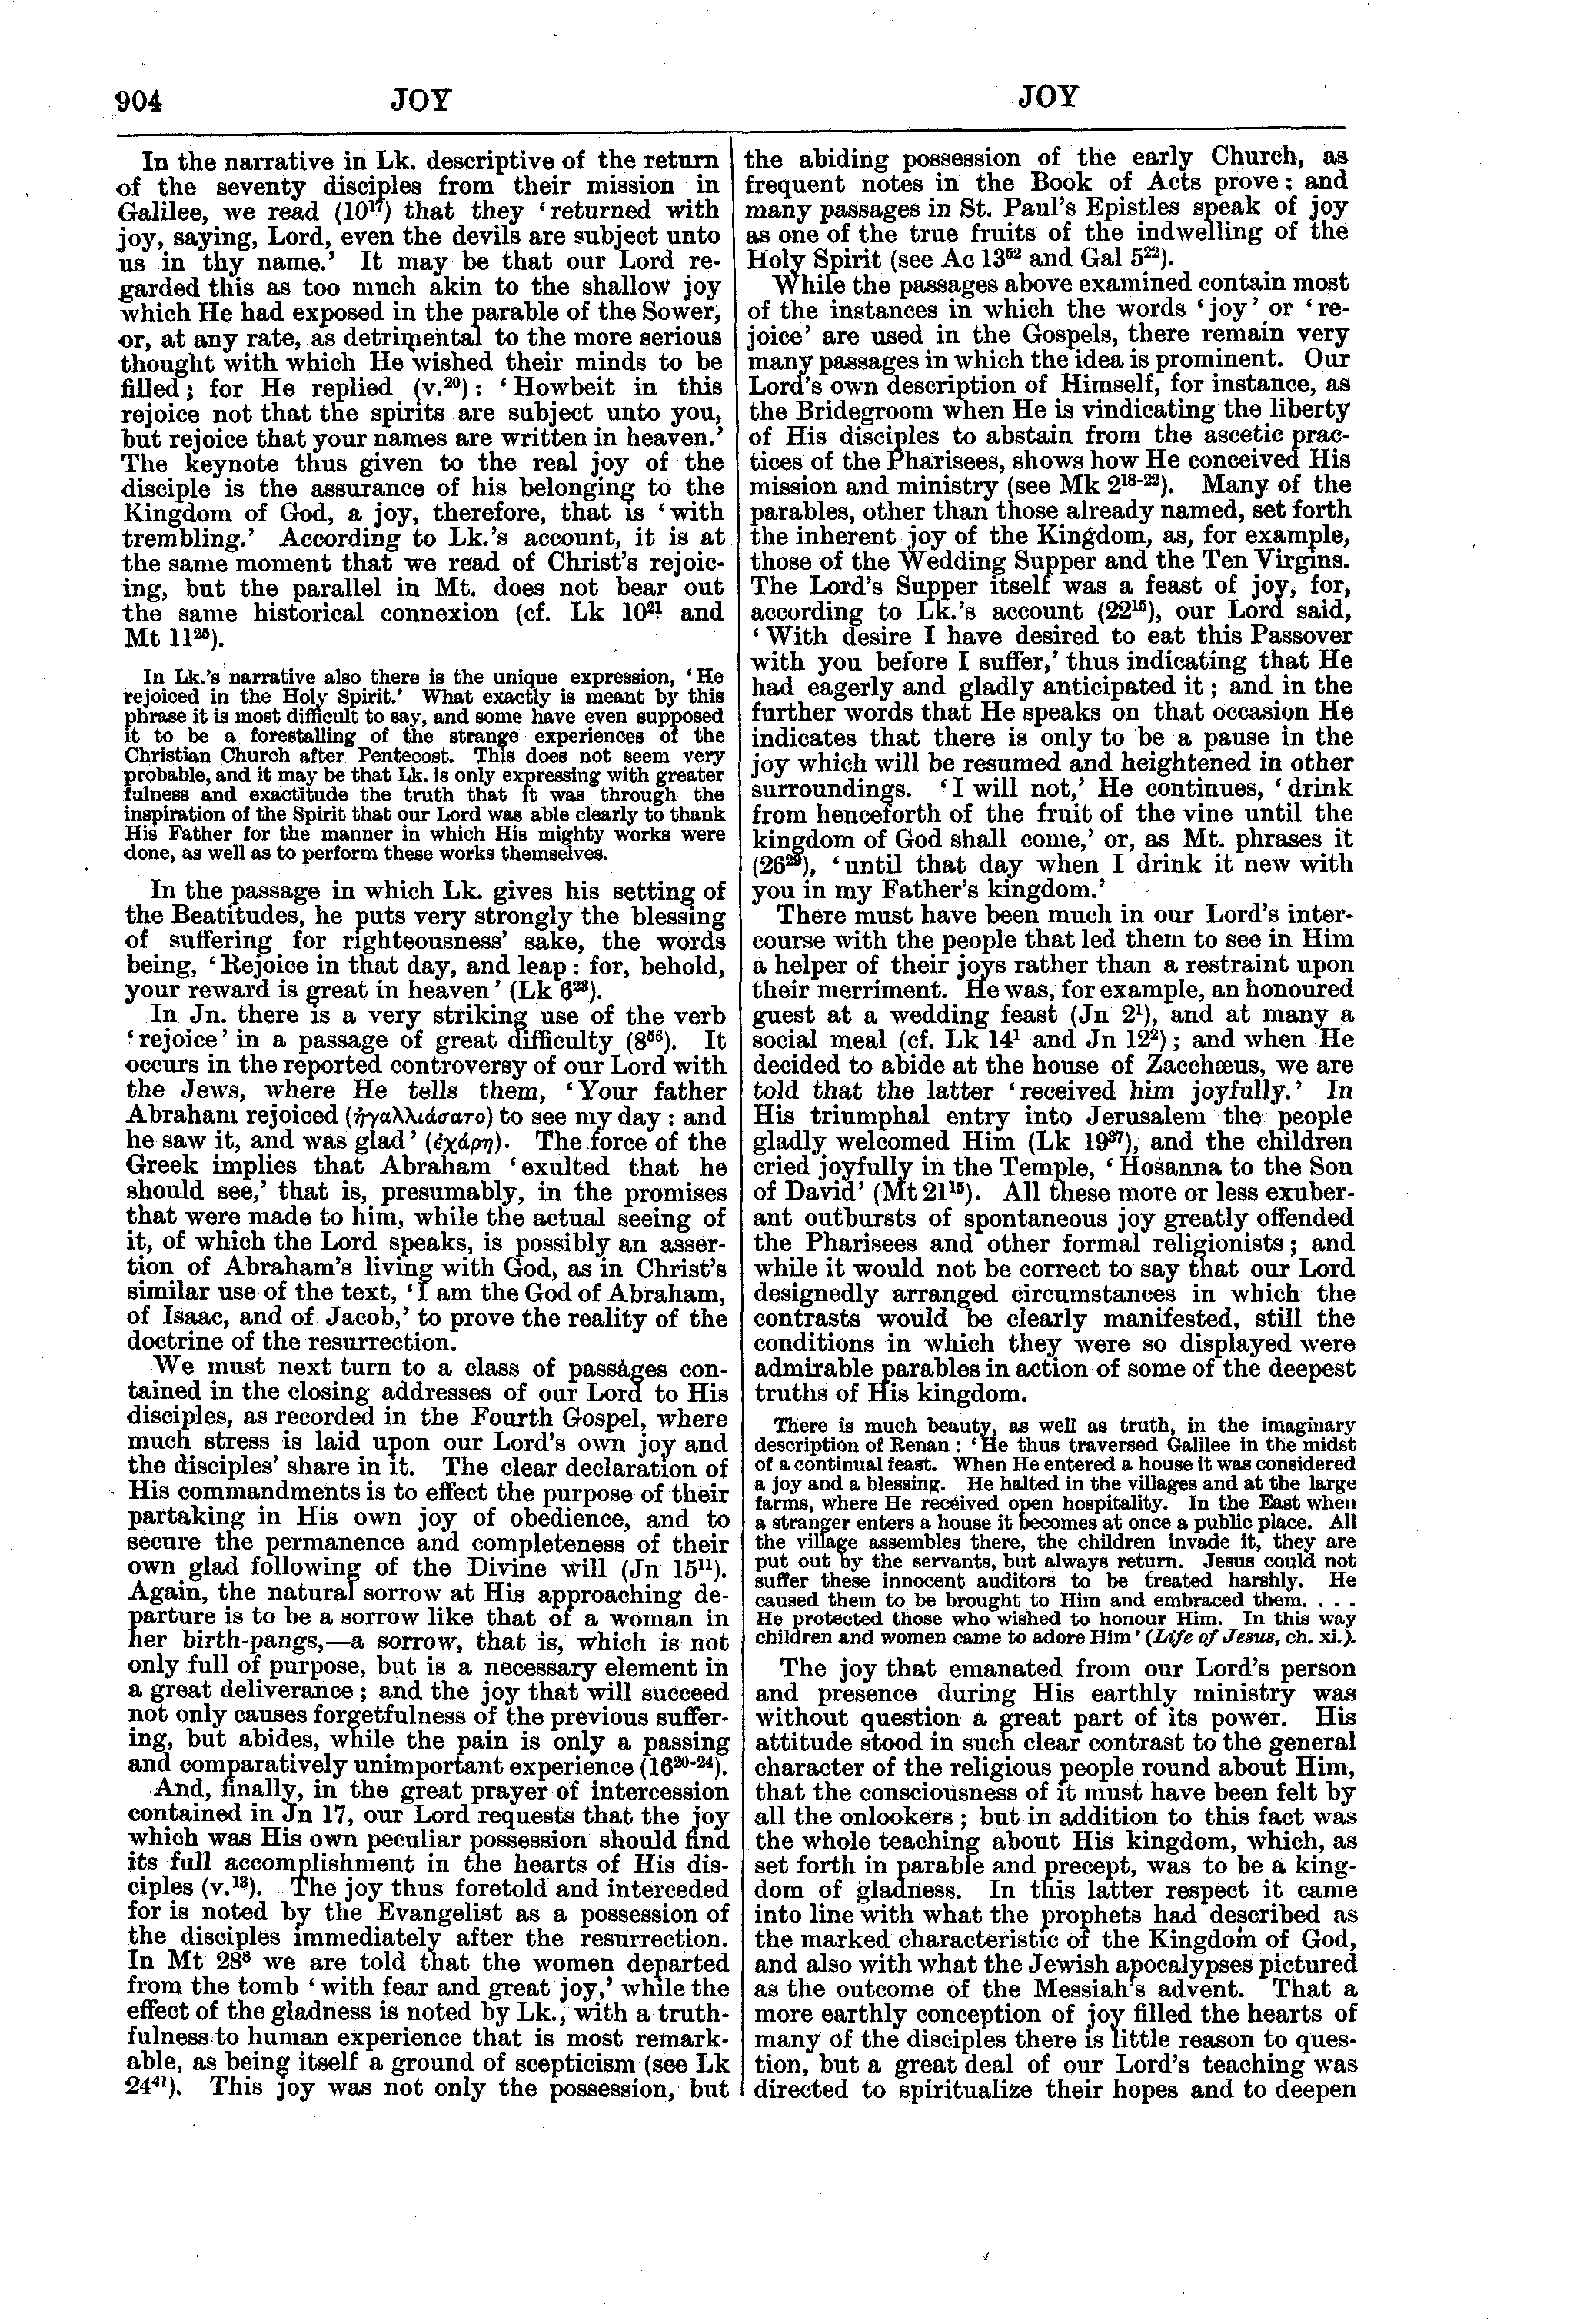 Image of page 904